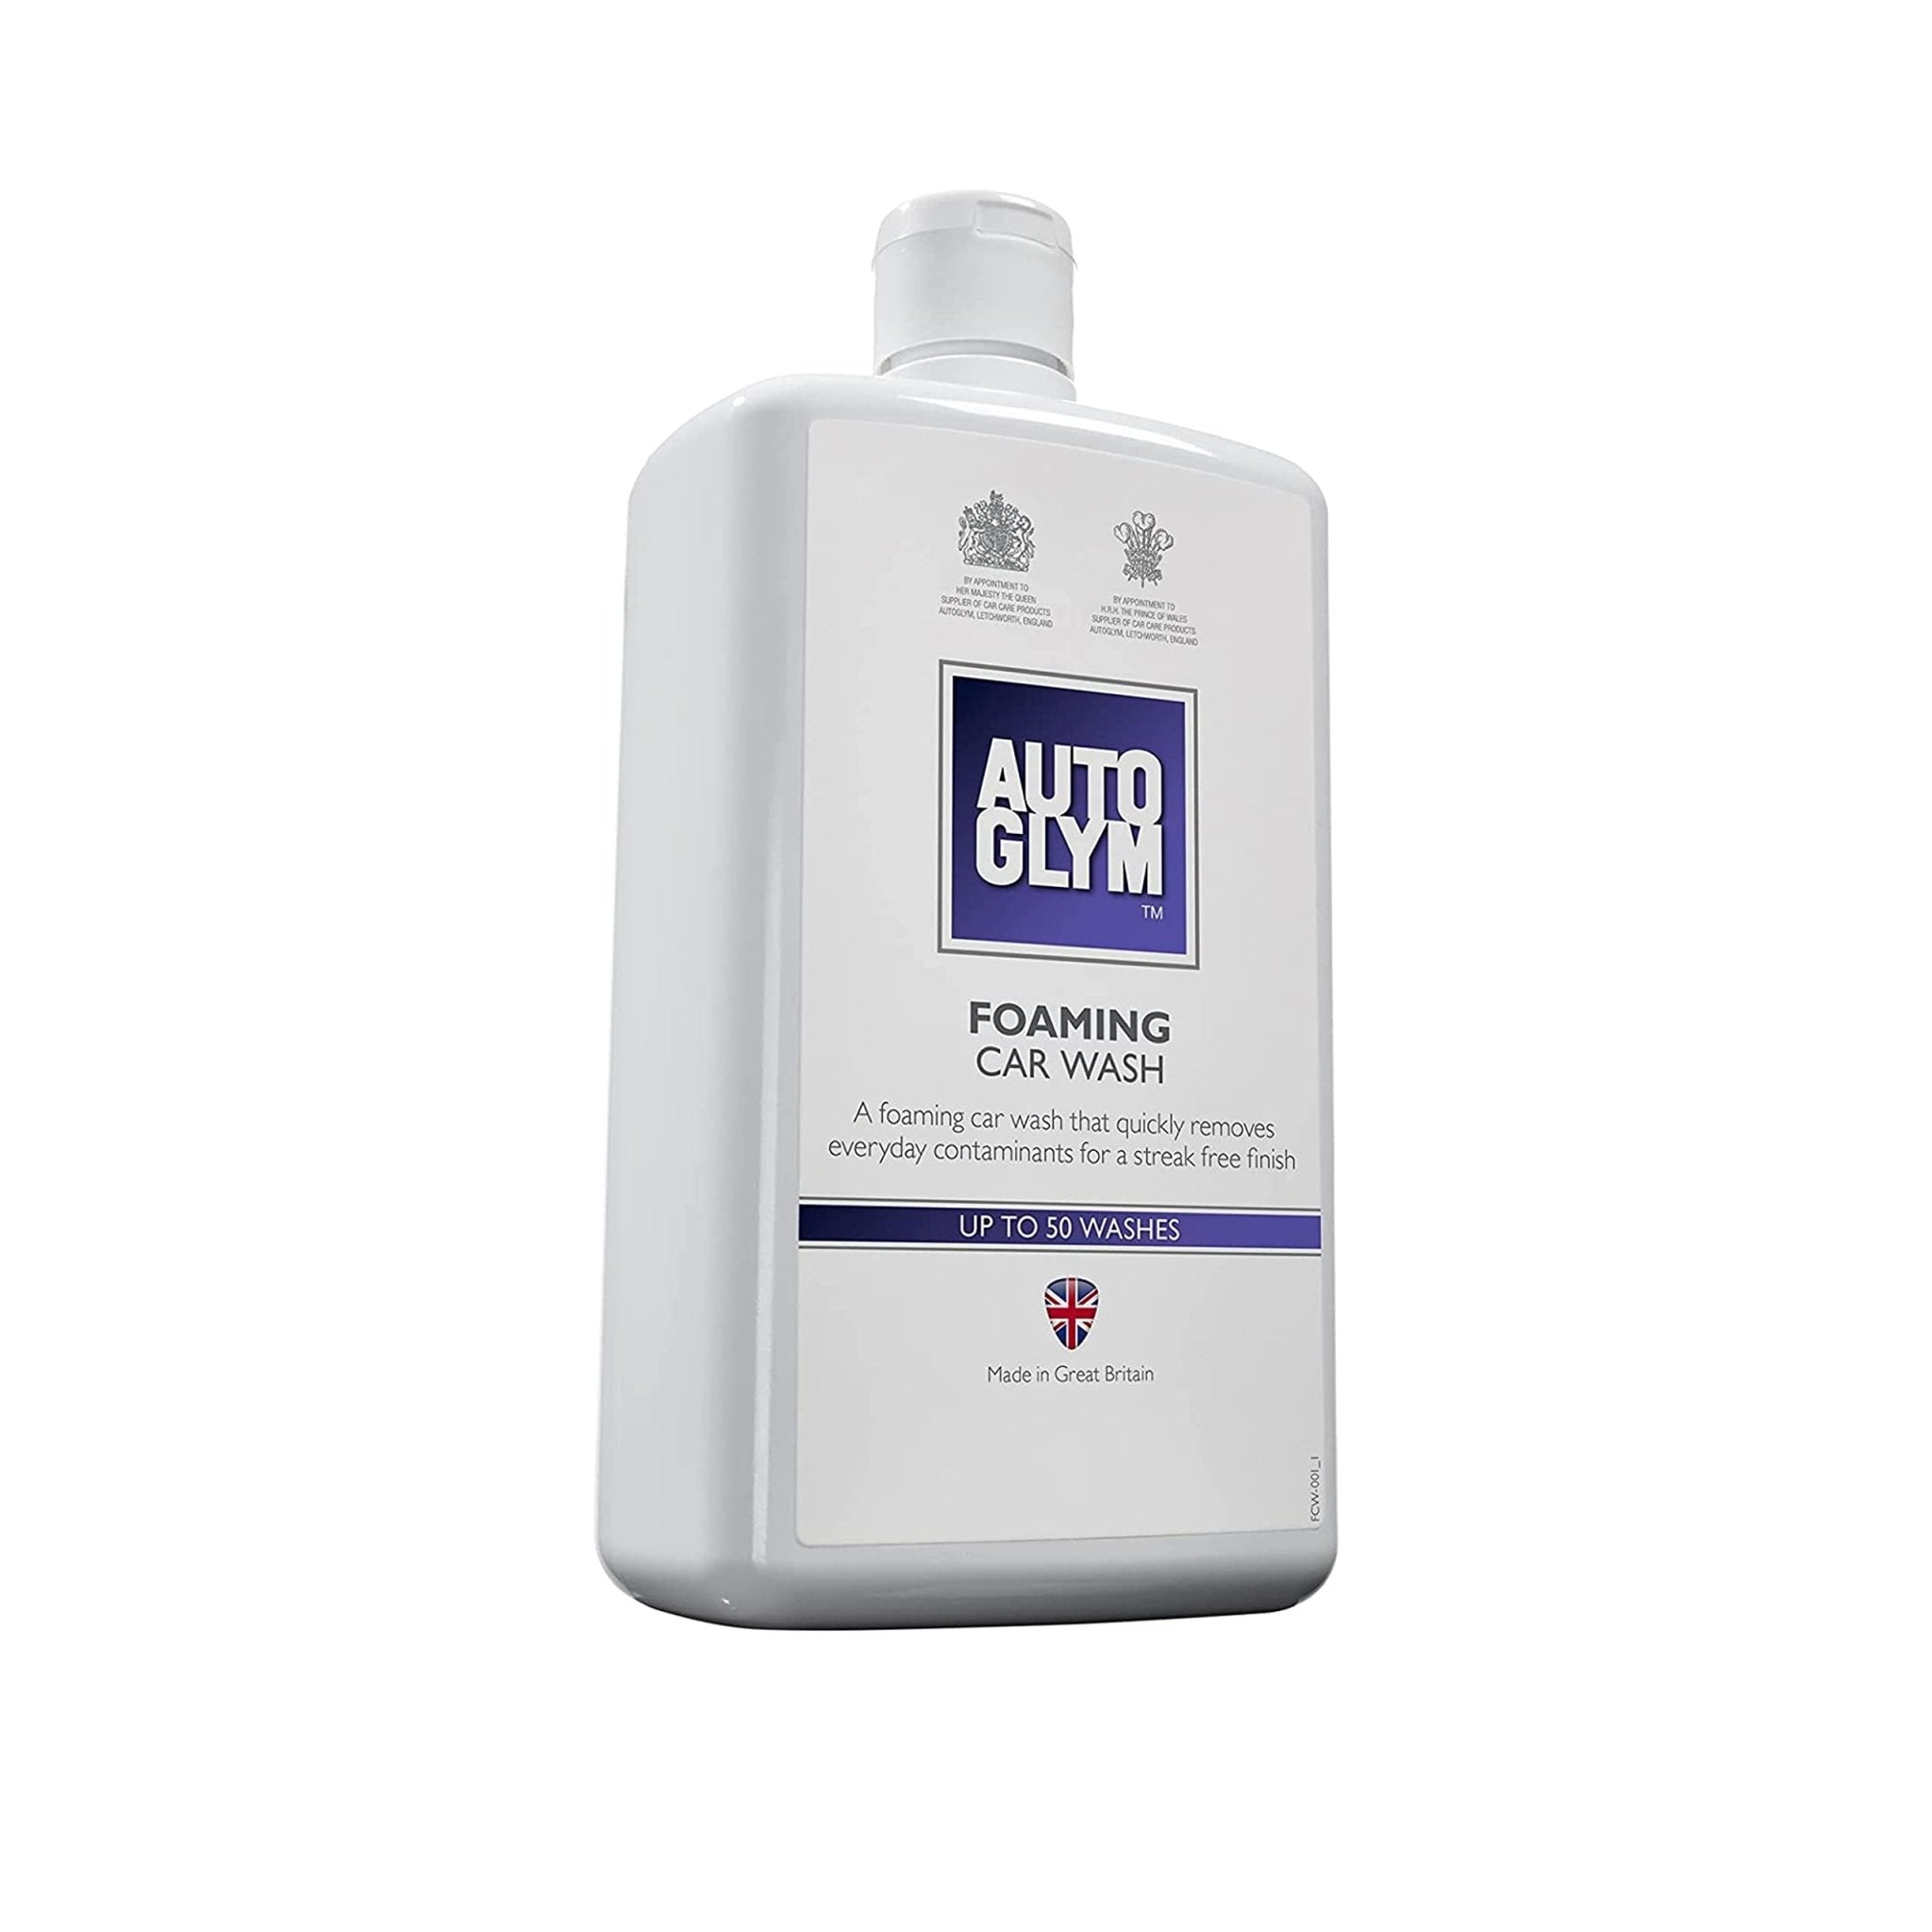 Autoglym Foaming Car Wash, 1 Litre - High Foaming Car Shampoo For All Bodyworks - pH Neutral, Up to 50 Washes and Wax Safe Formula for Cleaning Car Exterior - Concentrated Car Wash Soap - Ammpoure Wellbeing